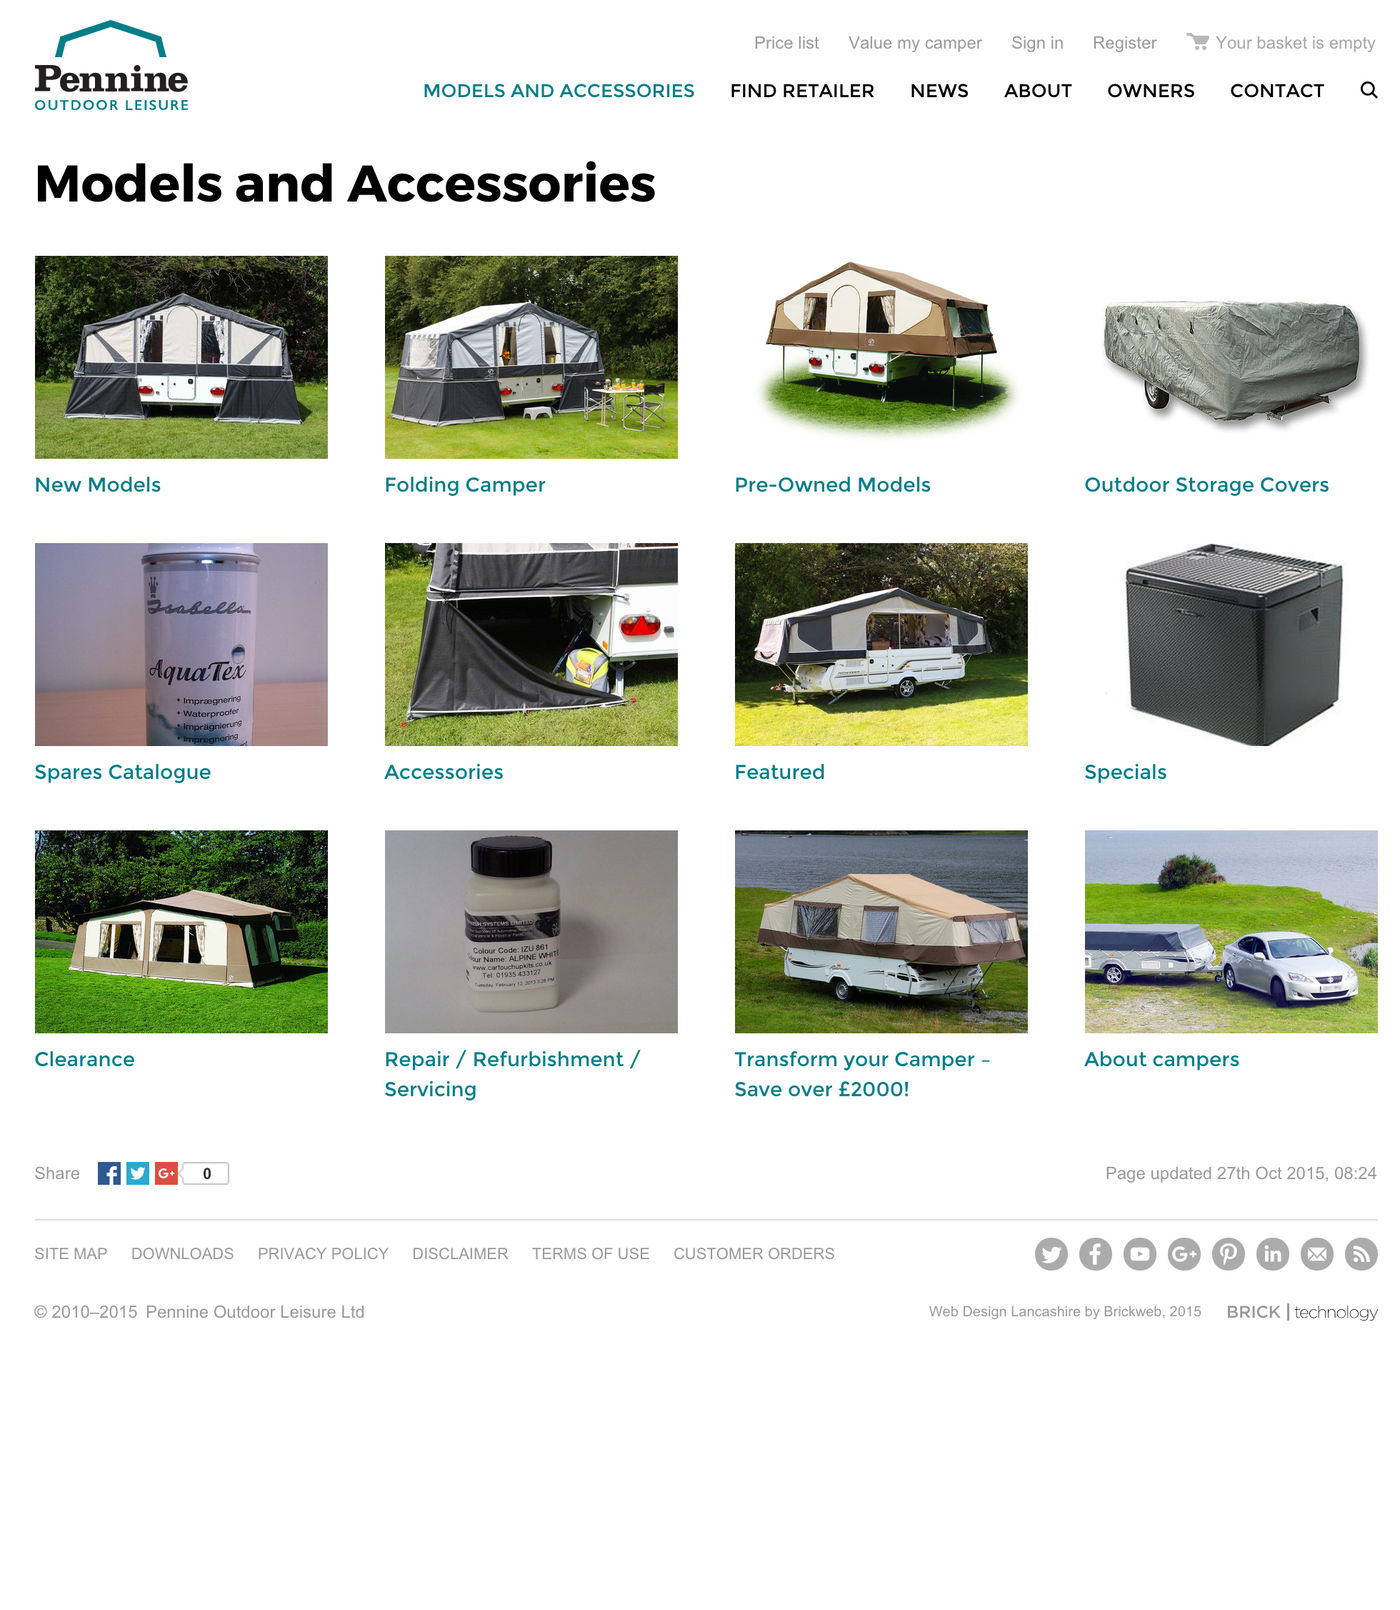 Pennine Outdoor Leisure Models and Accessories